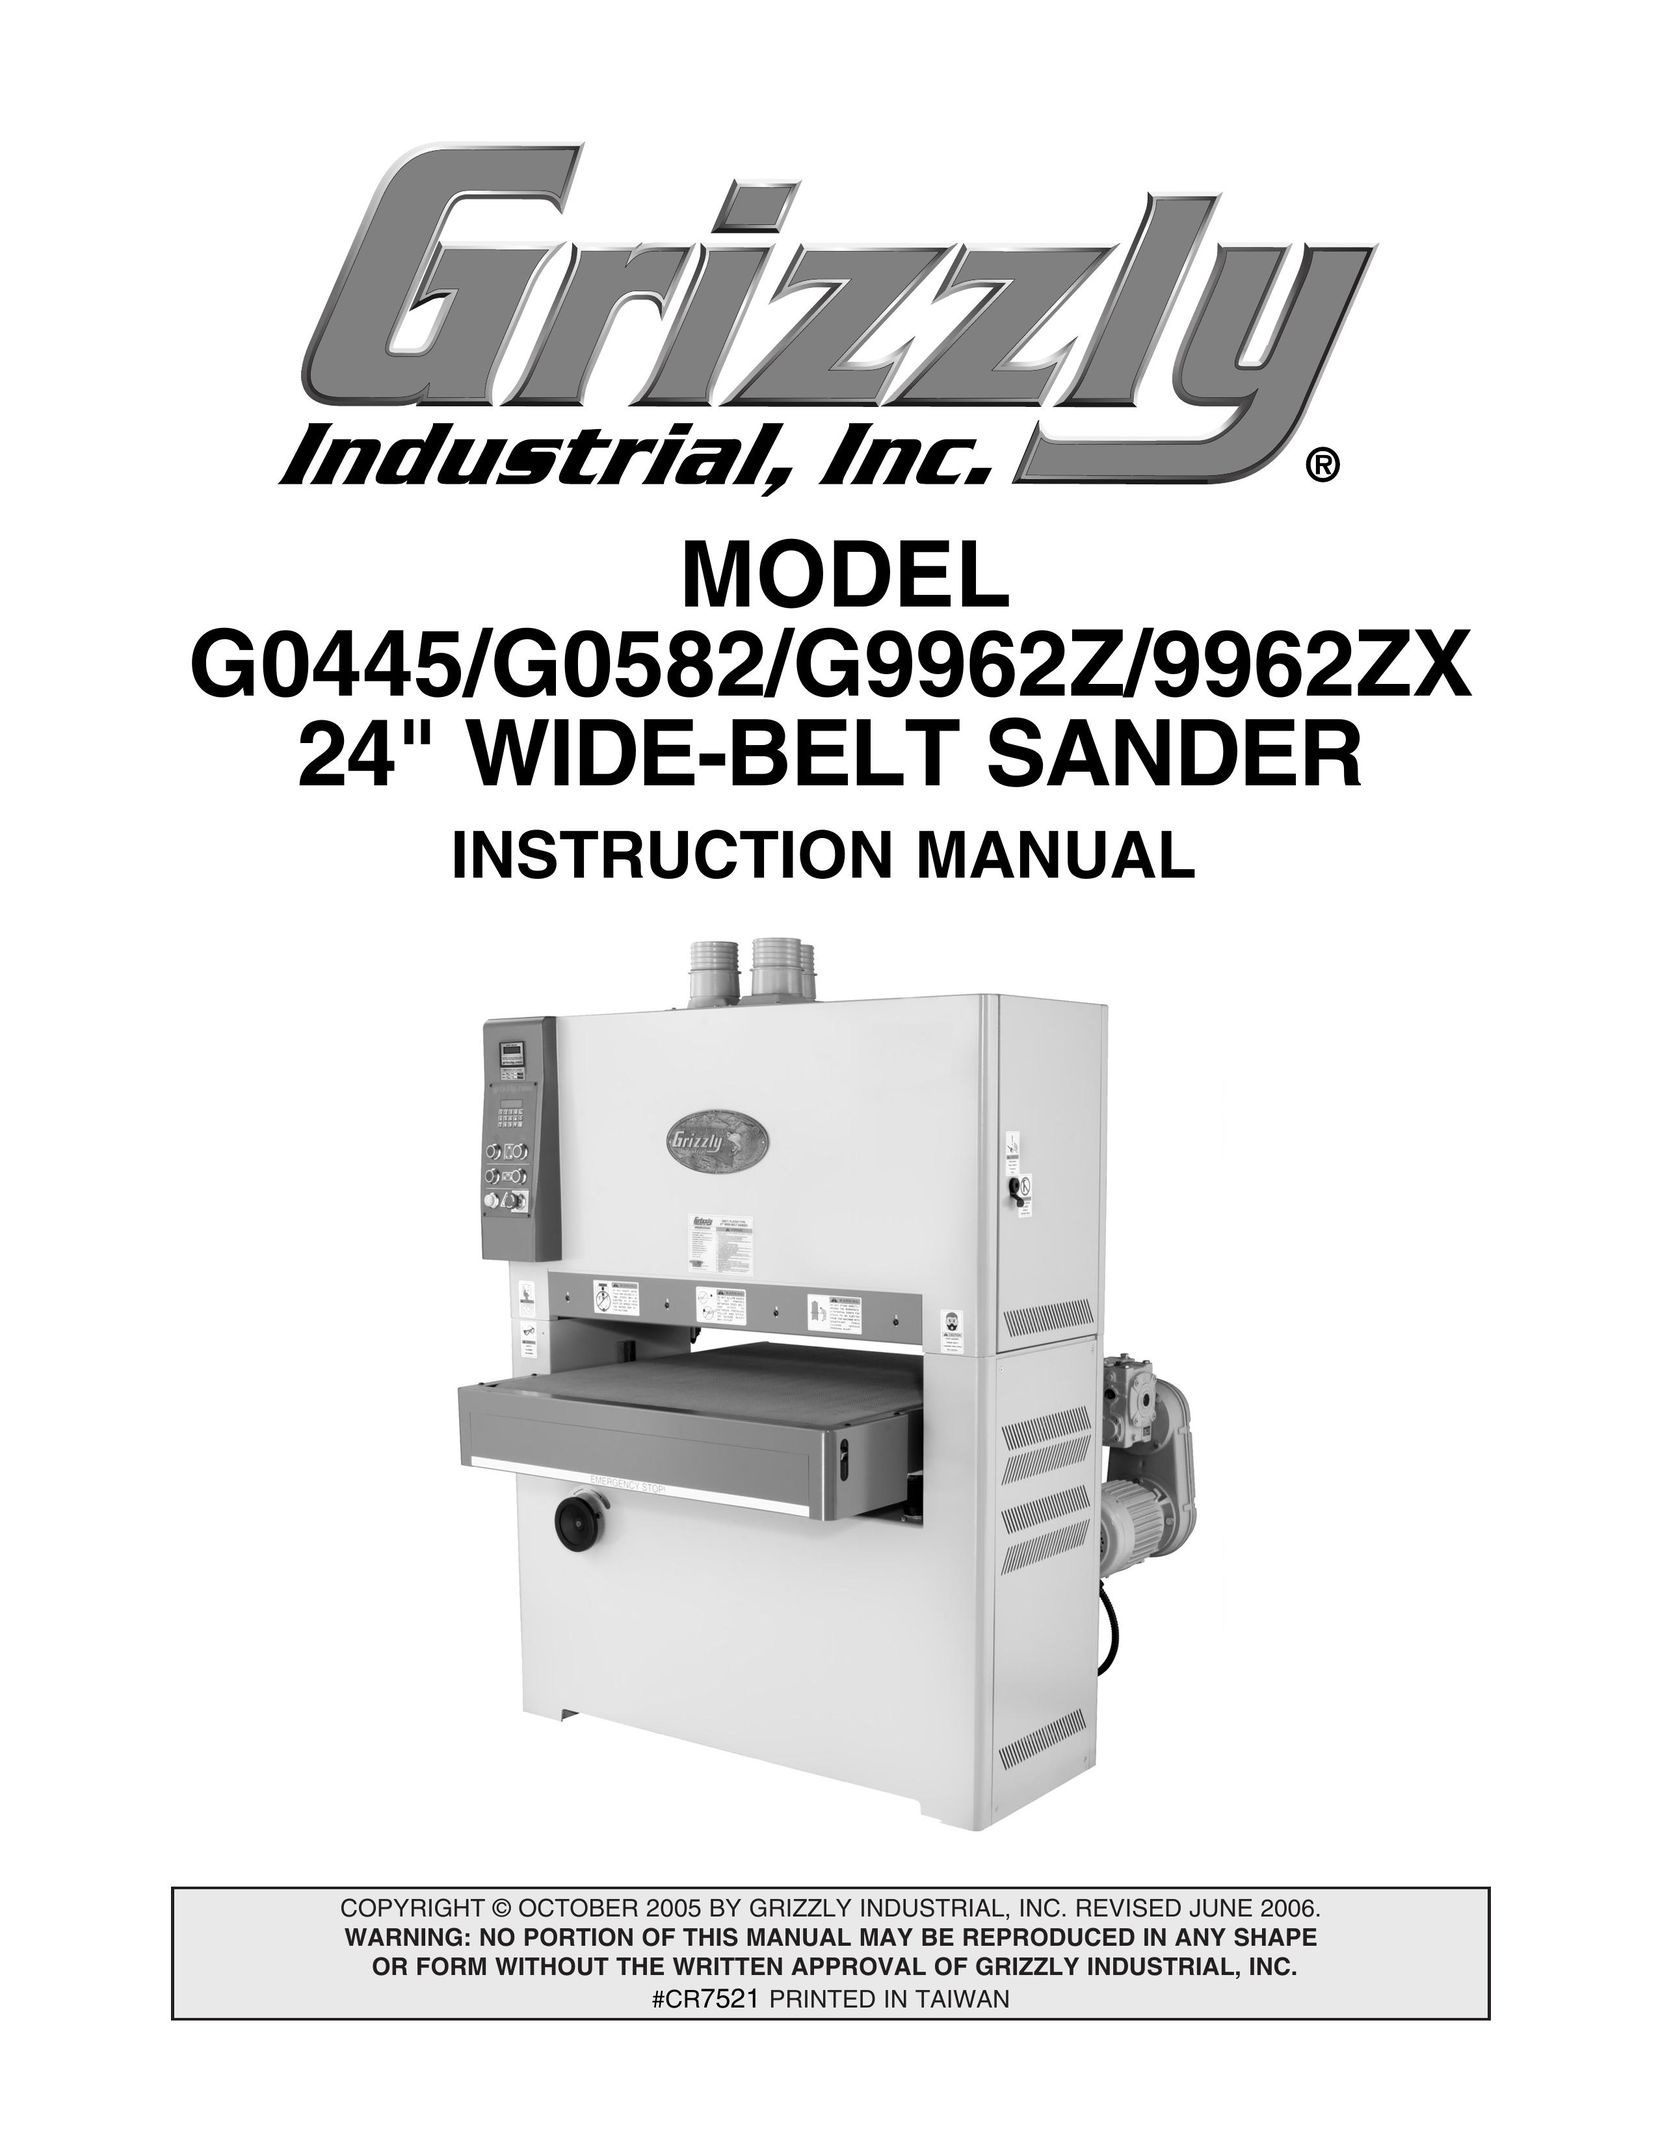 Grizzly G0582 Sander User Manual